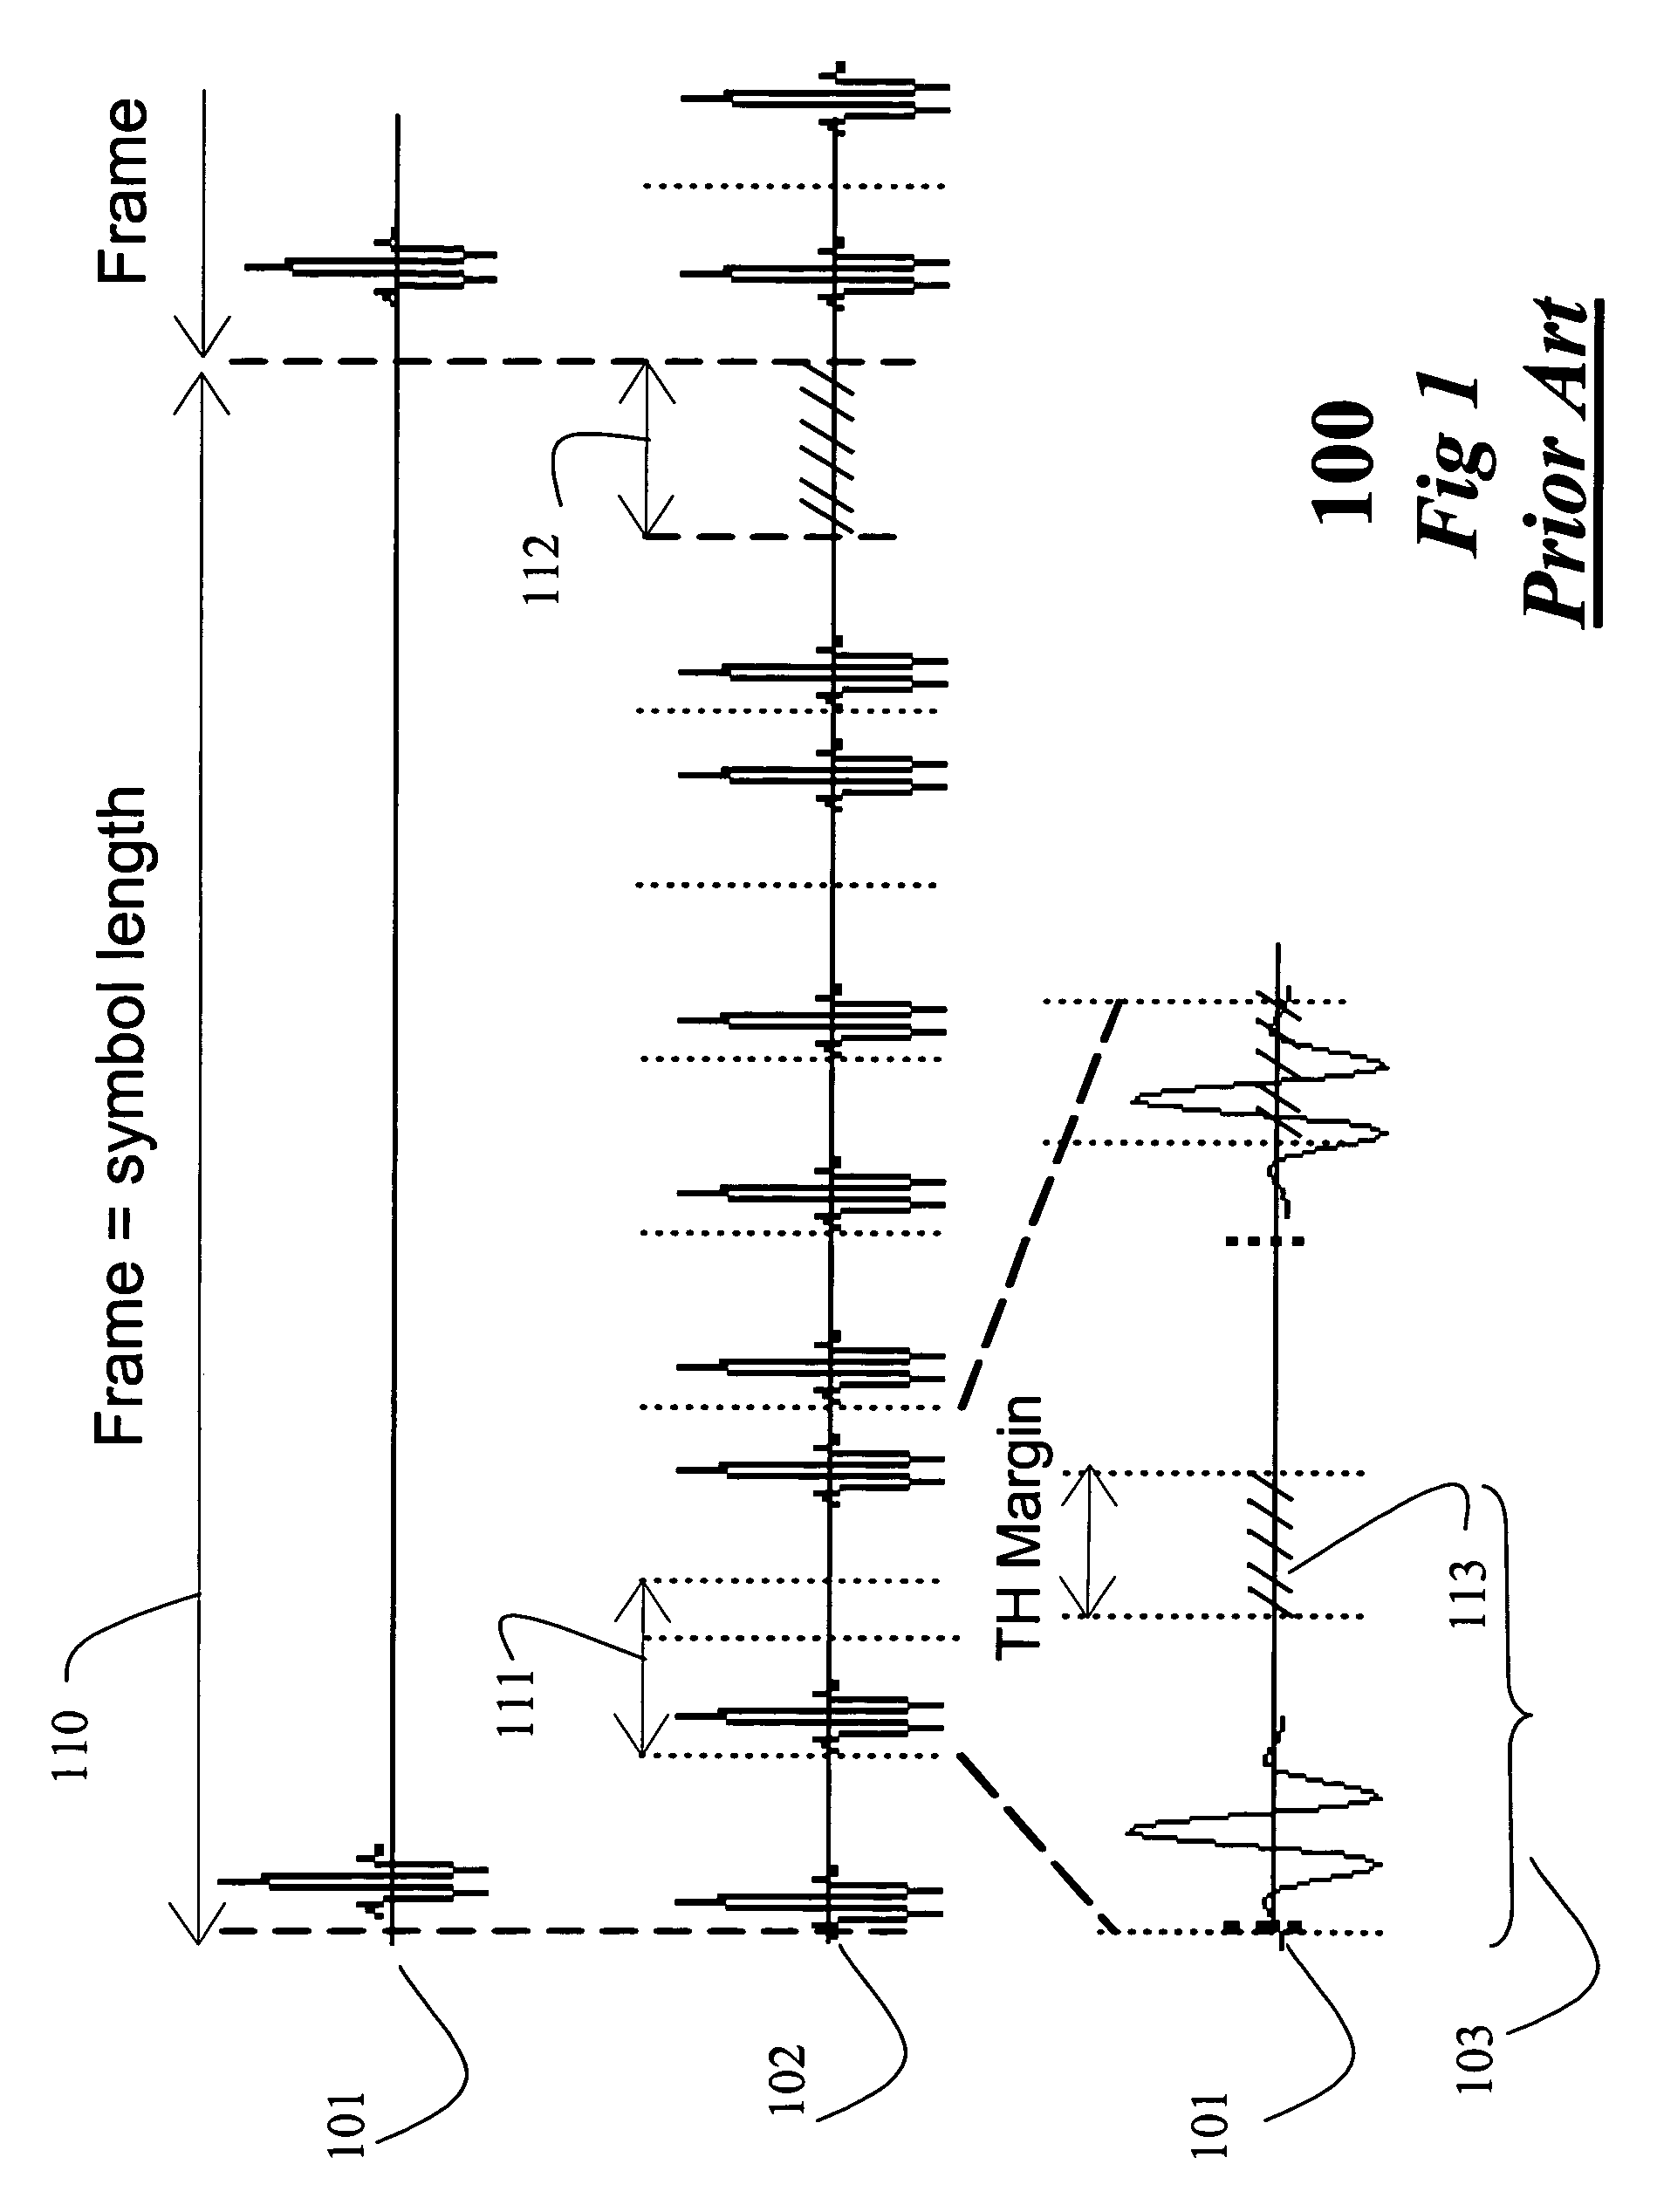 Randomly changing pulse polarity and phase in an UWB signal for power spectrum density shaping